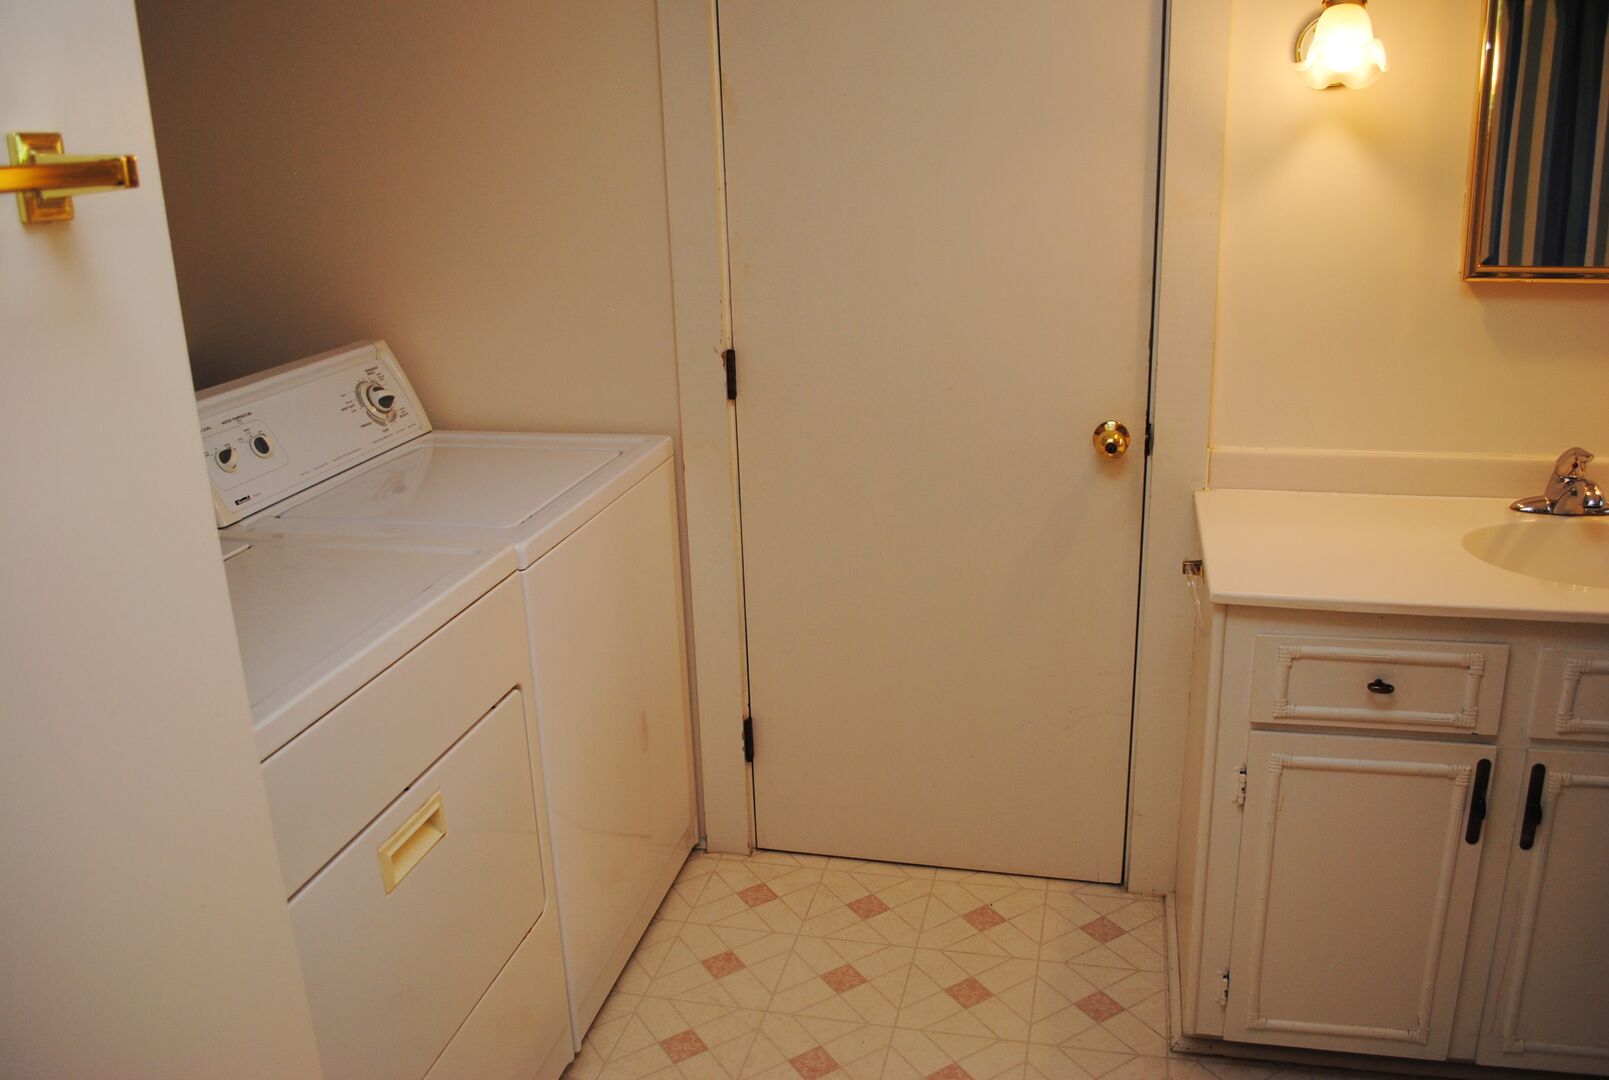 Bathroom and Laundry Room - Second Floor